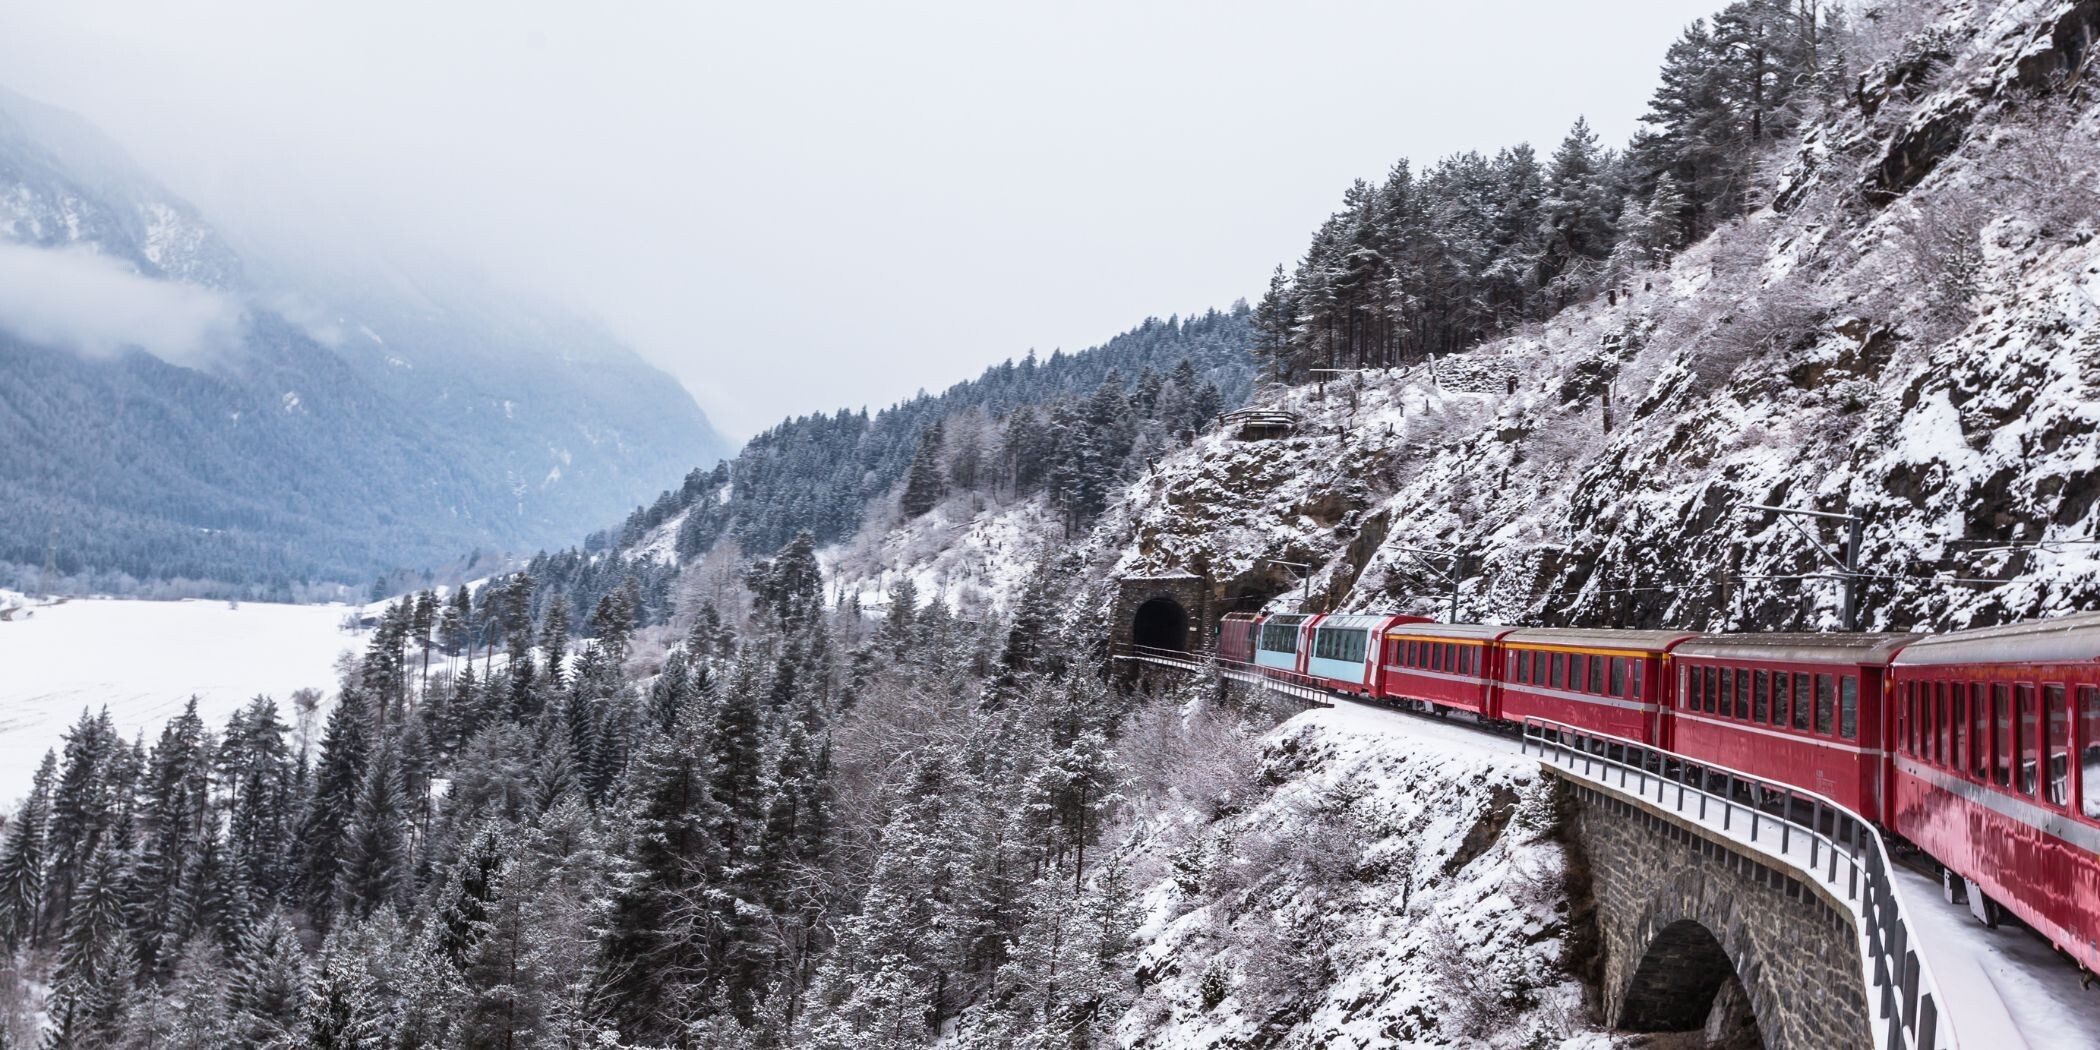 Glacier Express entering a tunnel in a stunning winter landscape.